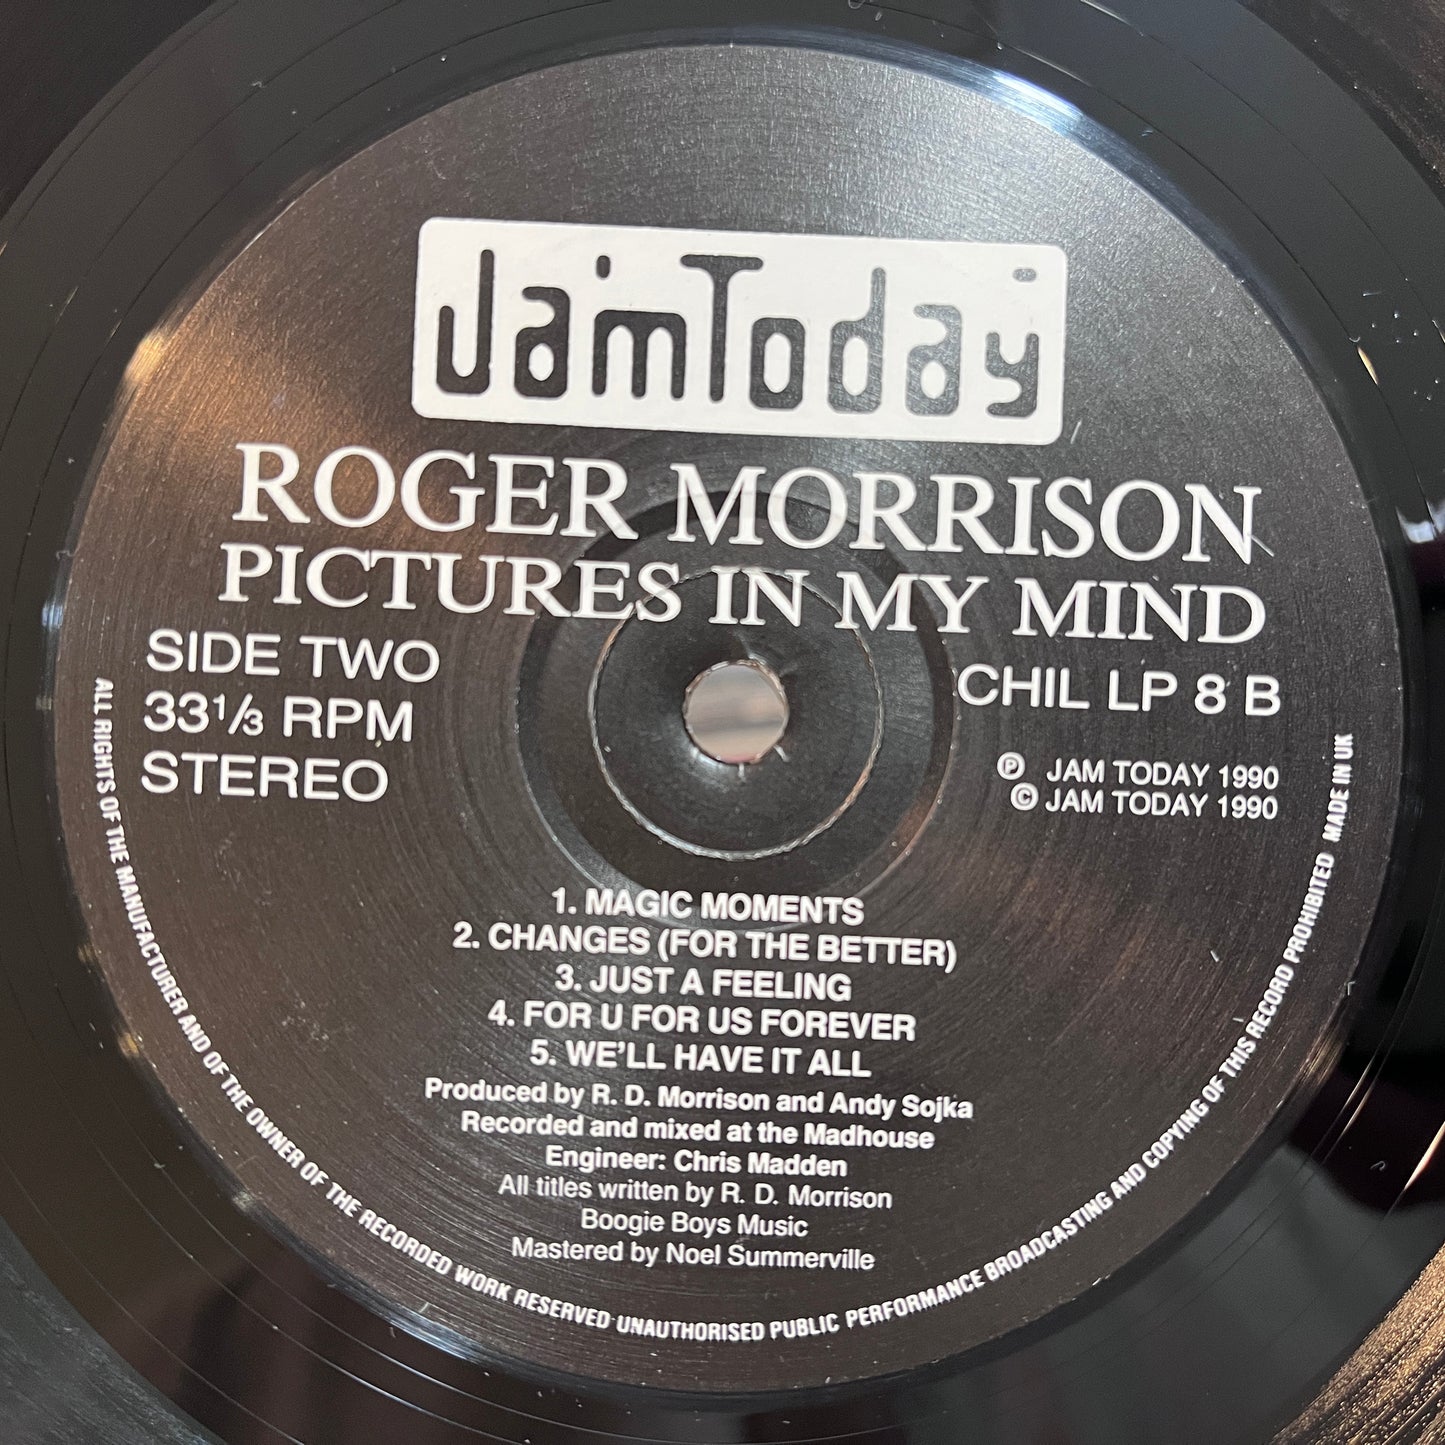 Roger Morrison – Pictures In My Mind